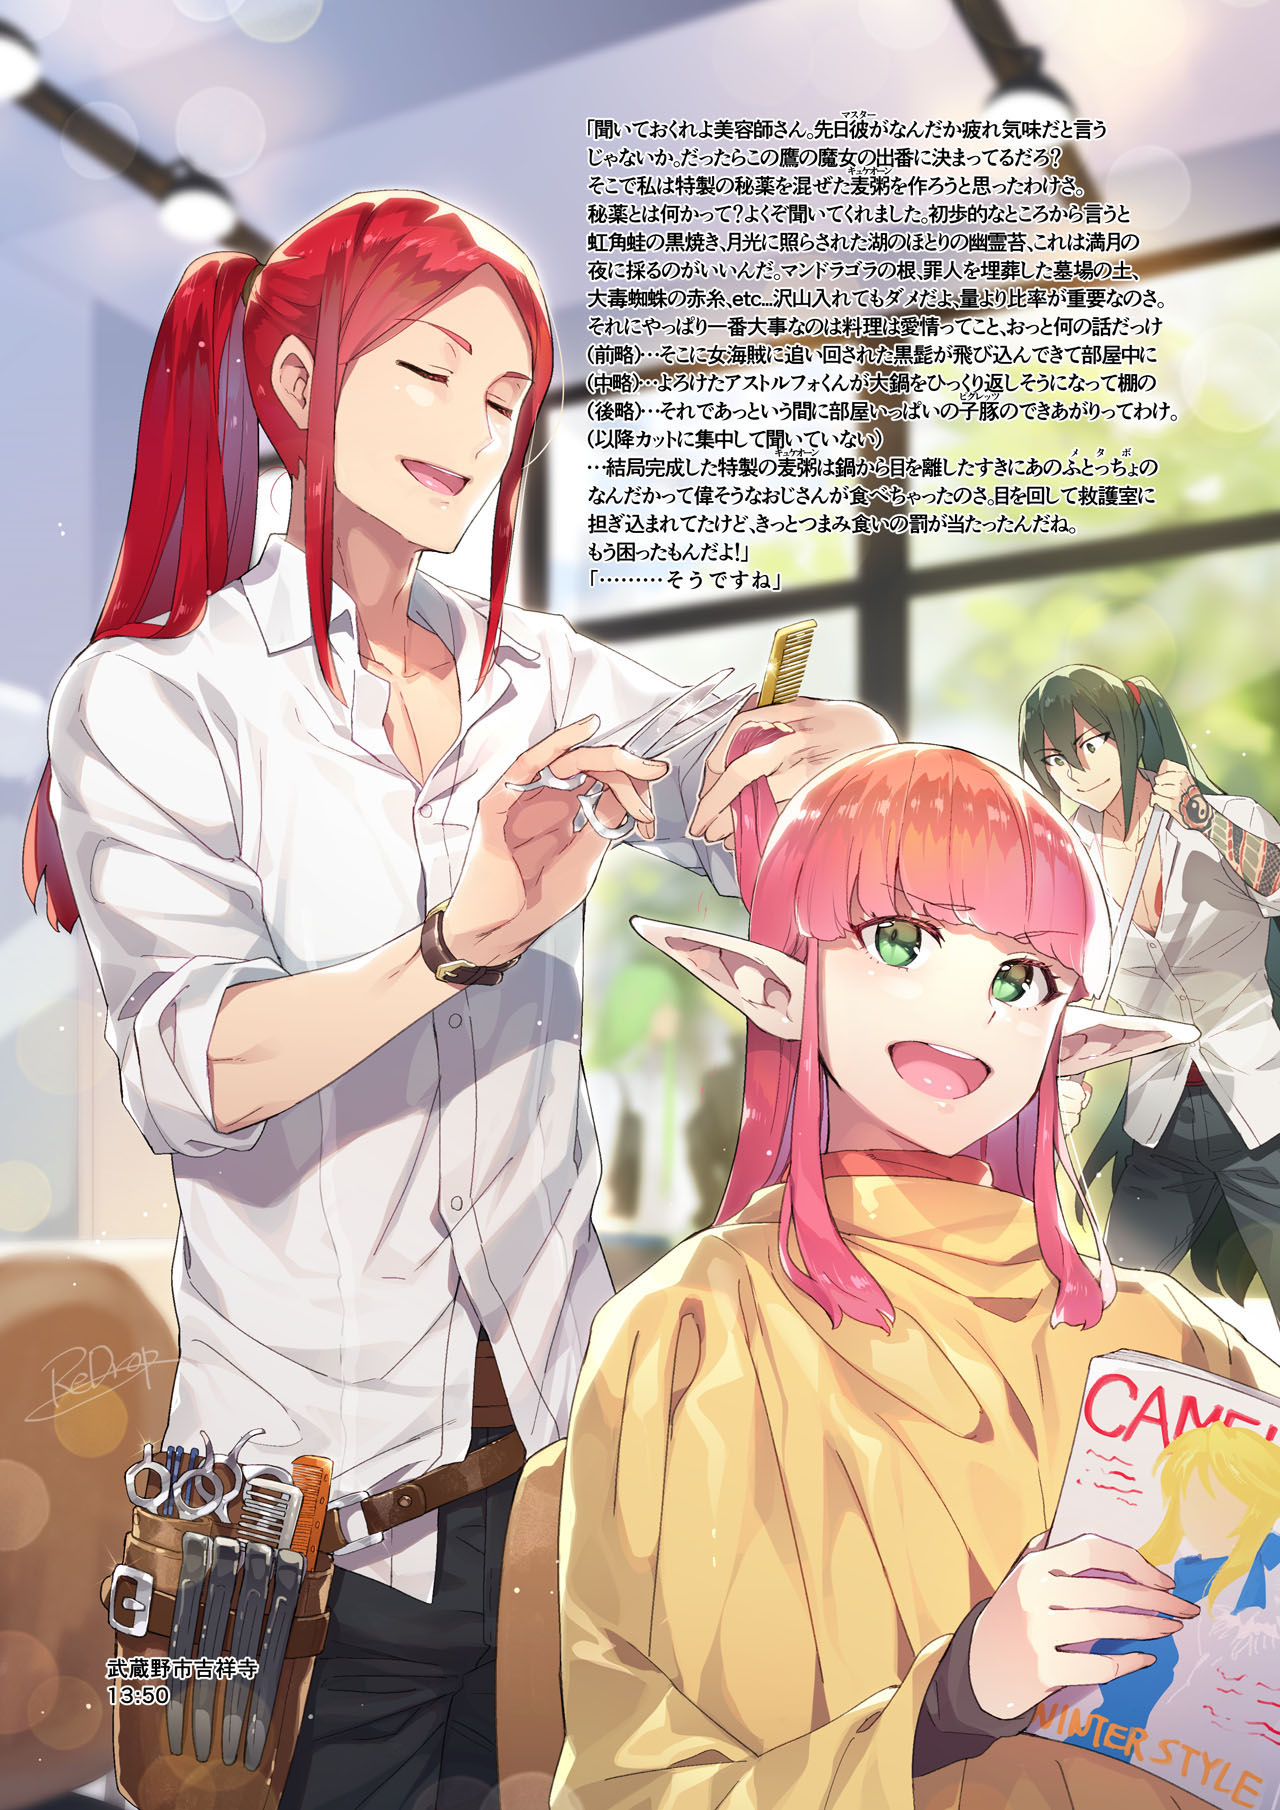 1boy 1girl 2boys alternate_costume bangs circe_(fate/grand_order) closed_eyes eyebrows_visible_through_hair fate/grand_order fate_(series) hair_between_eyes hairdressing highres long_hair looking_back magazine multiple_boys pointy_ears ponytail redhead redrop smile tattoo translation_request tristan_(fate/grand_order) yan_qing_(fate/grand_order)